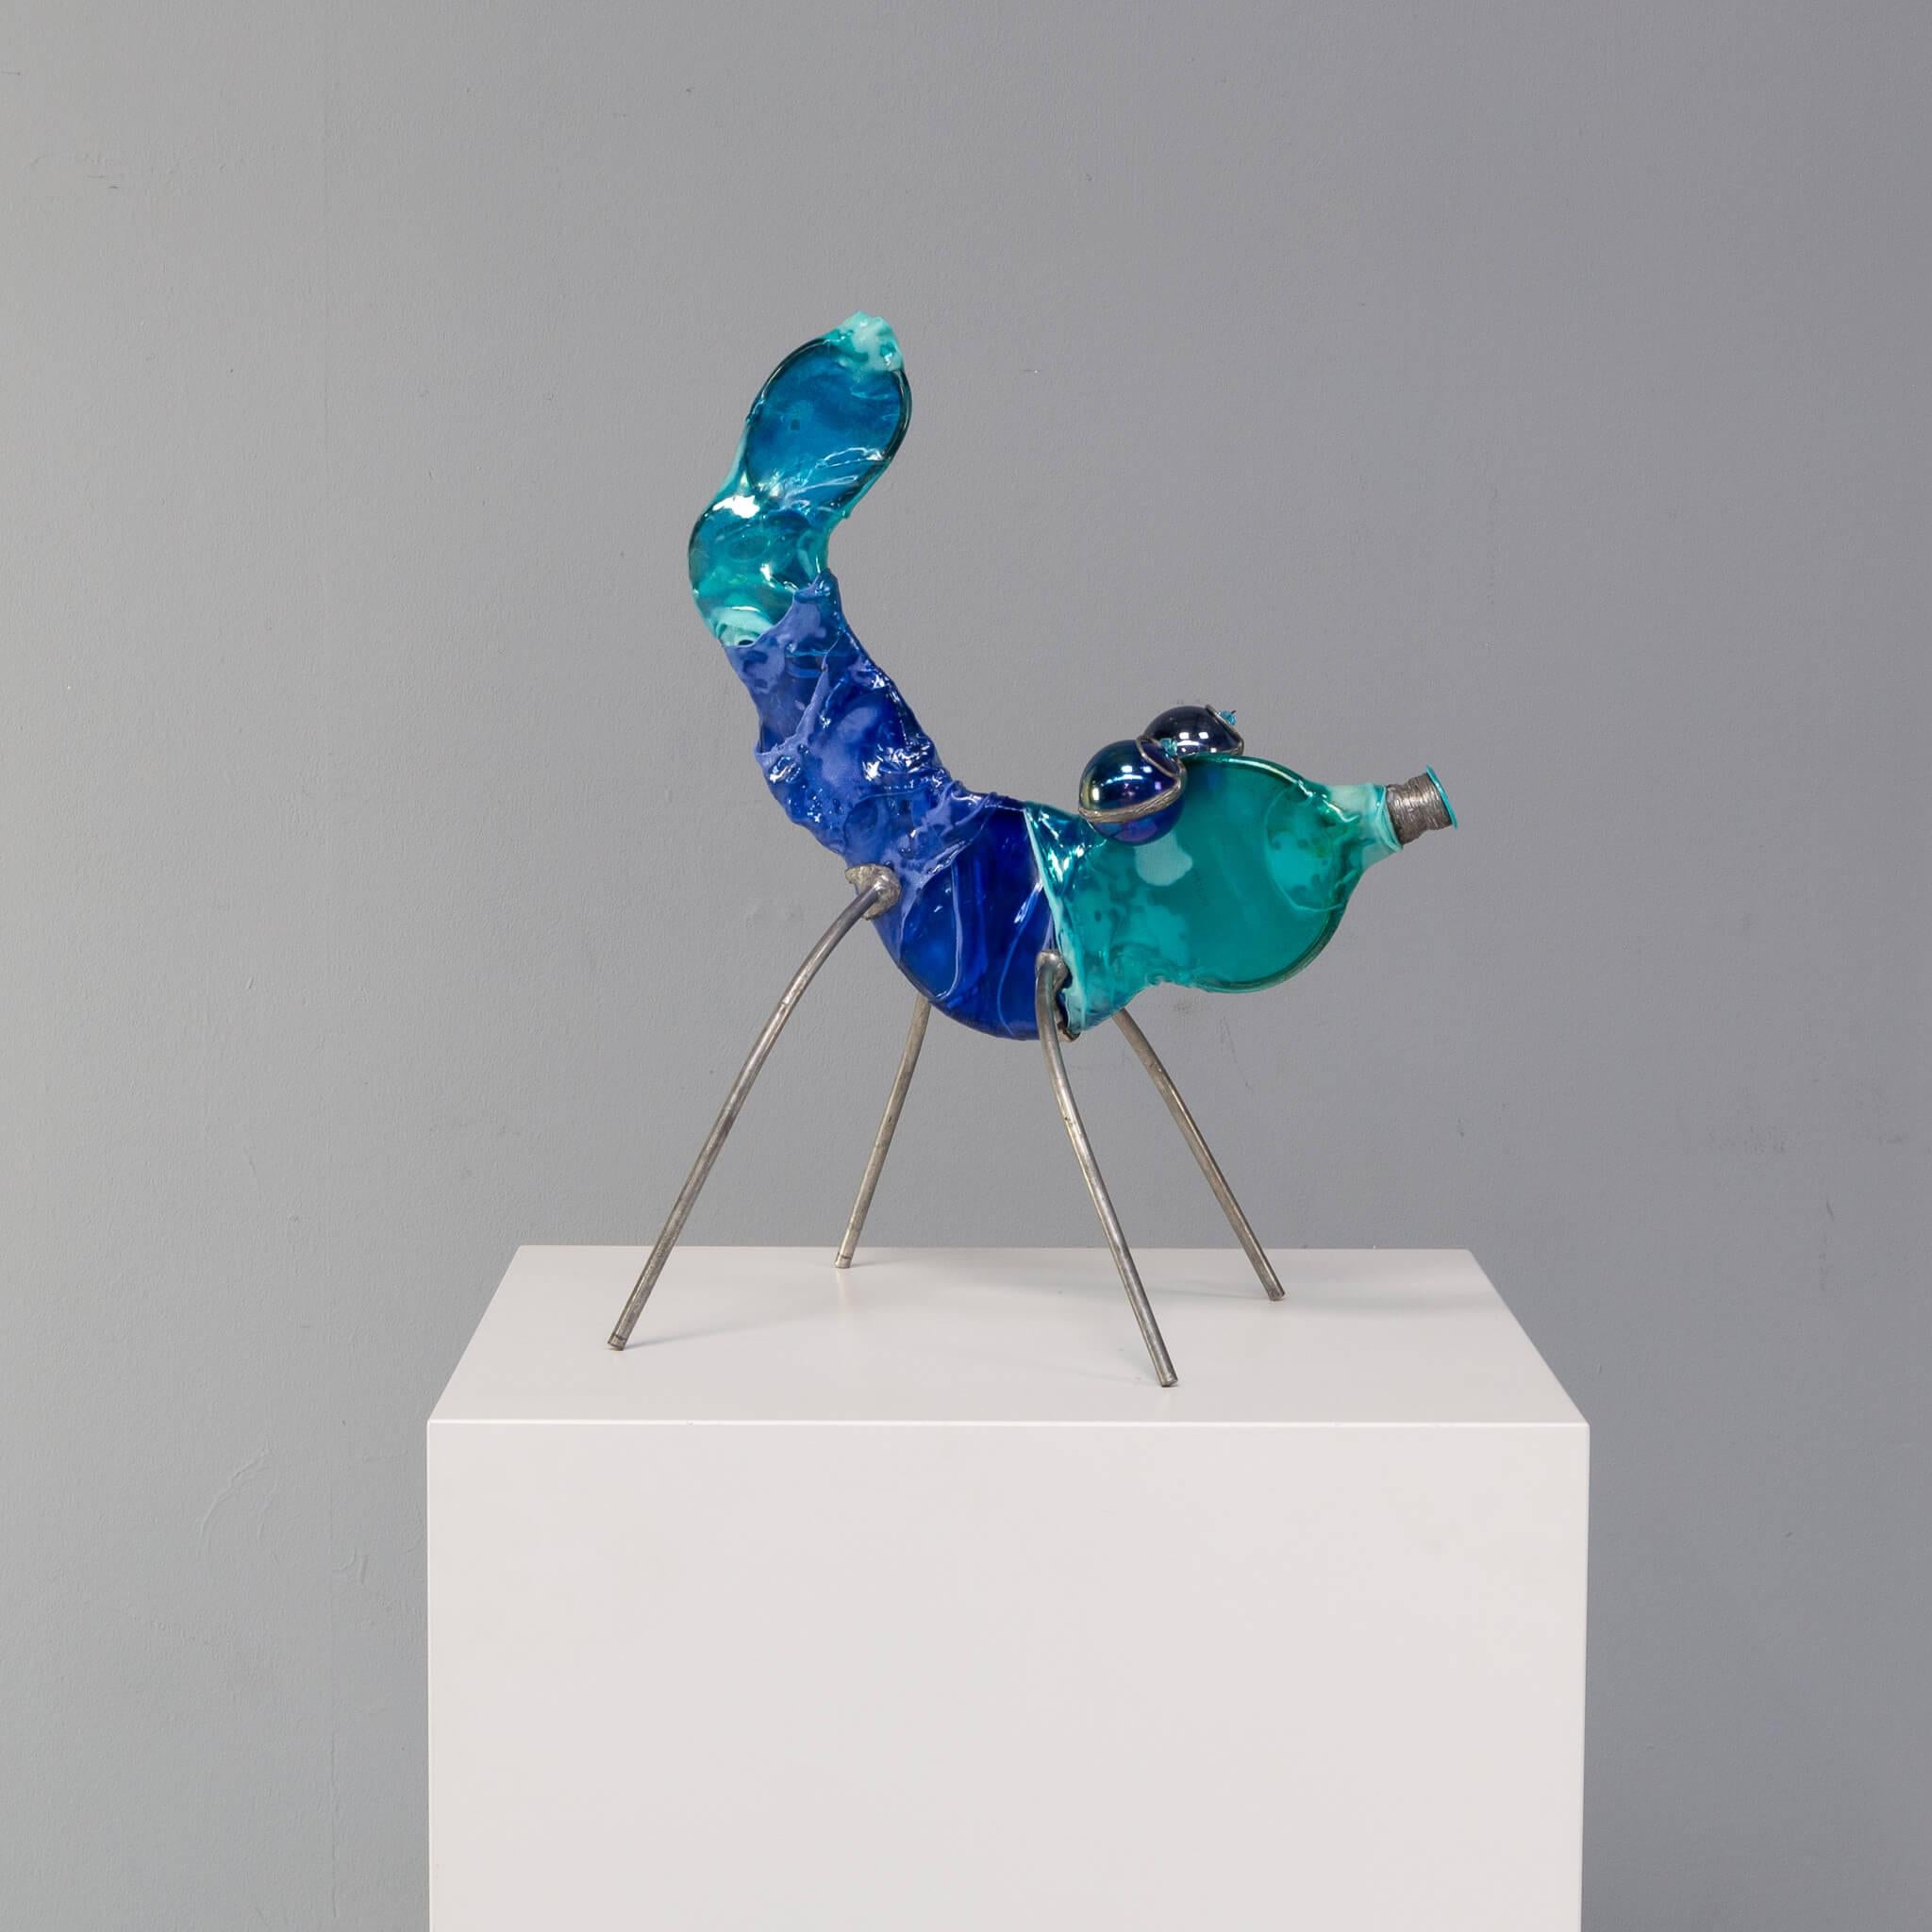 Modern Johan Nieuwborg Insect Sculpture For Sale